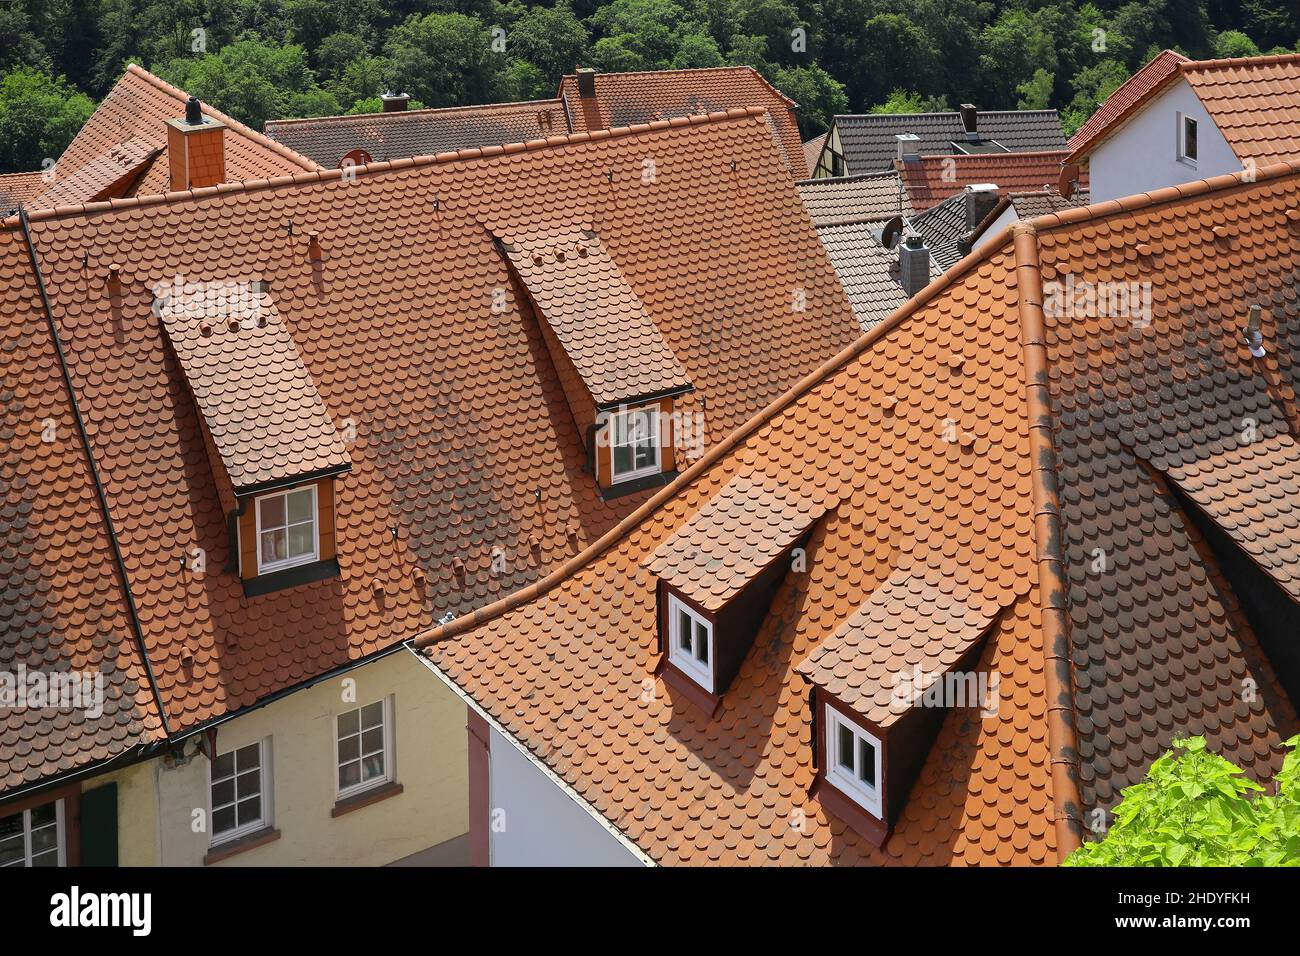 rooflights, tiled roof, roofs, rooflight, tiled roofs, roof Stock Photo